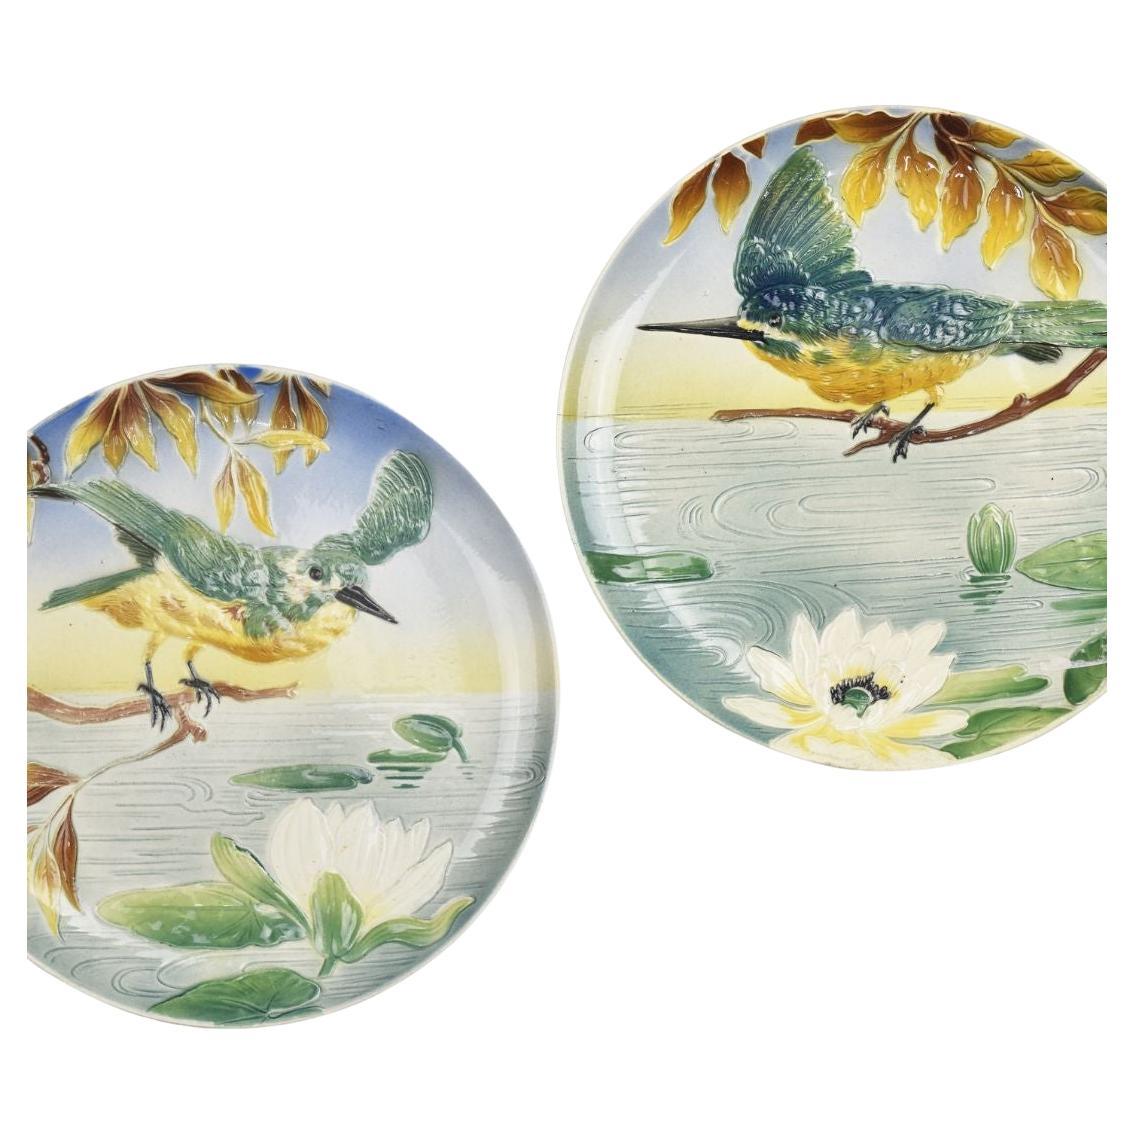 Excuisite Pair of Antique Majolica Wall Plates Kingfisher Bird Pattern